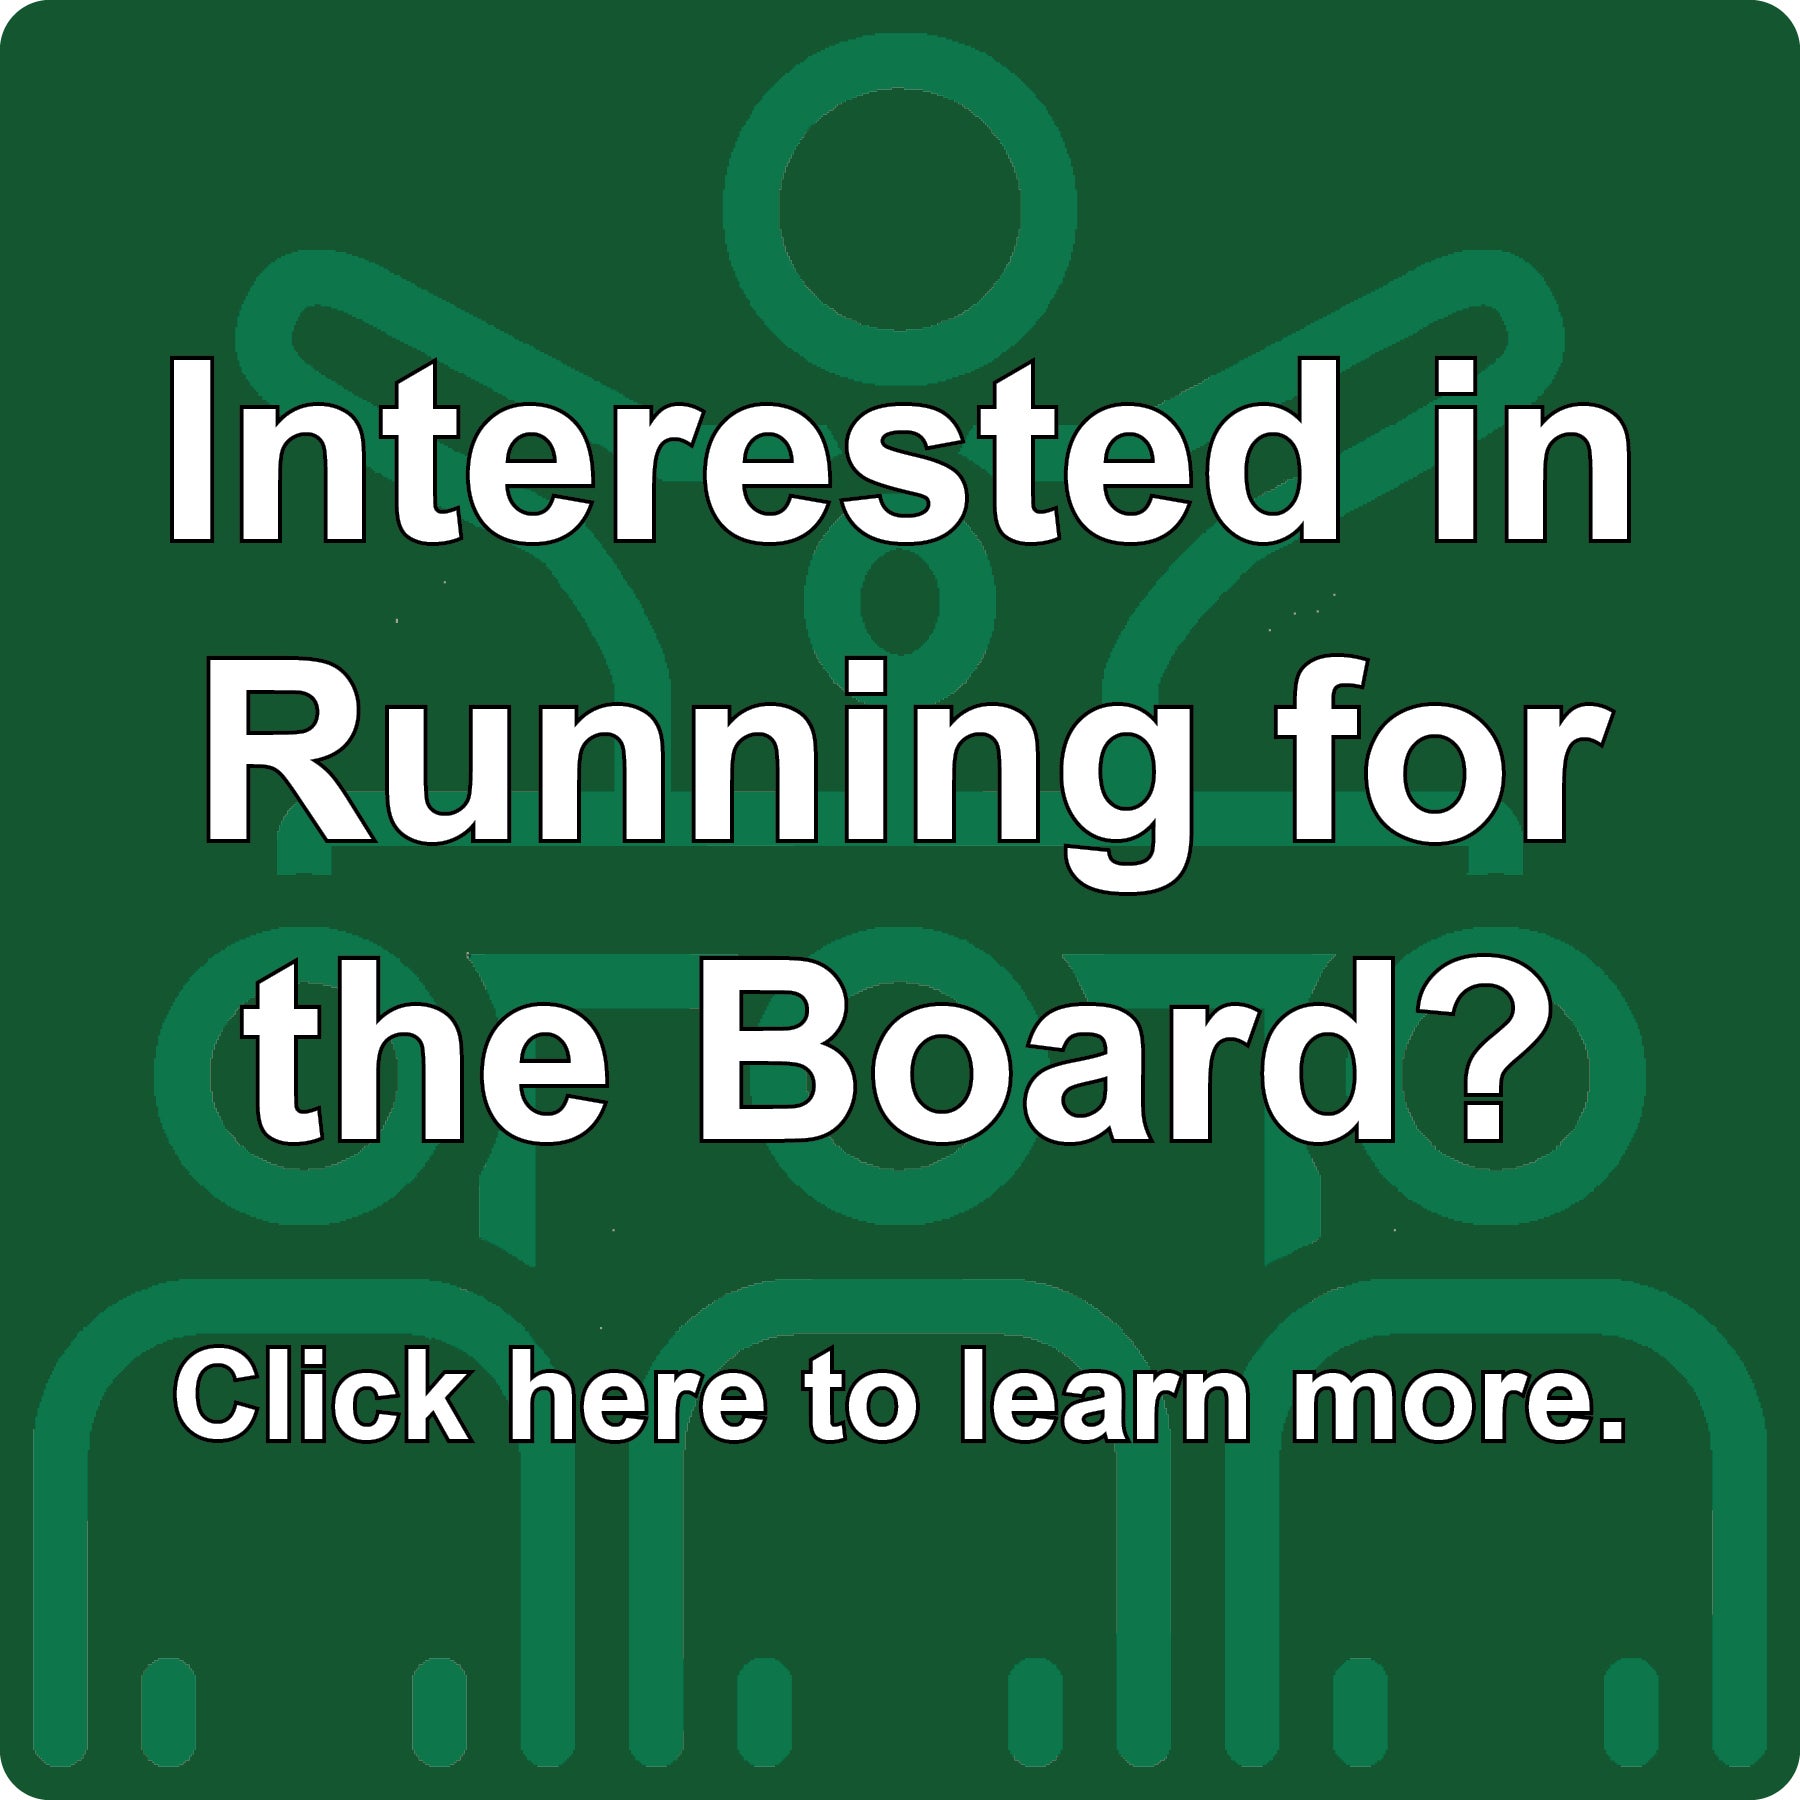 Link to information on running for the board